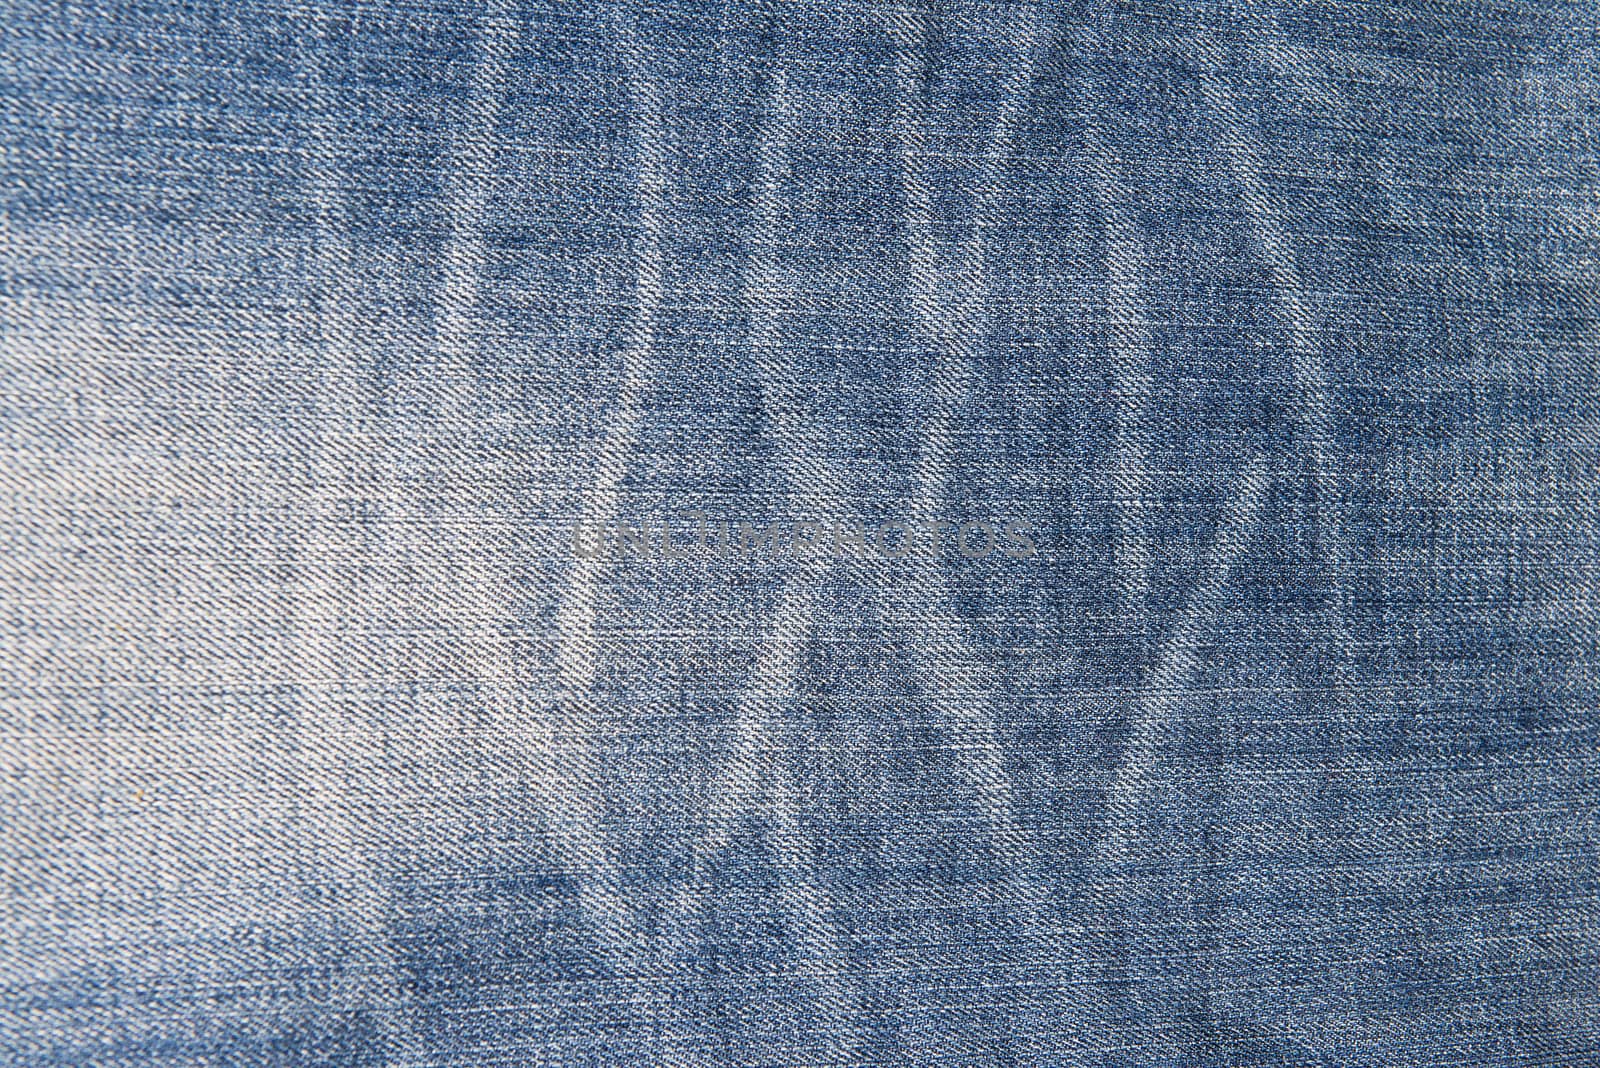 Old and worn blue jeans pattern background in a king size
